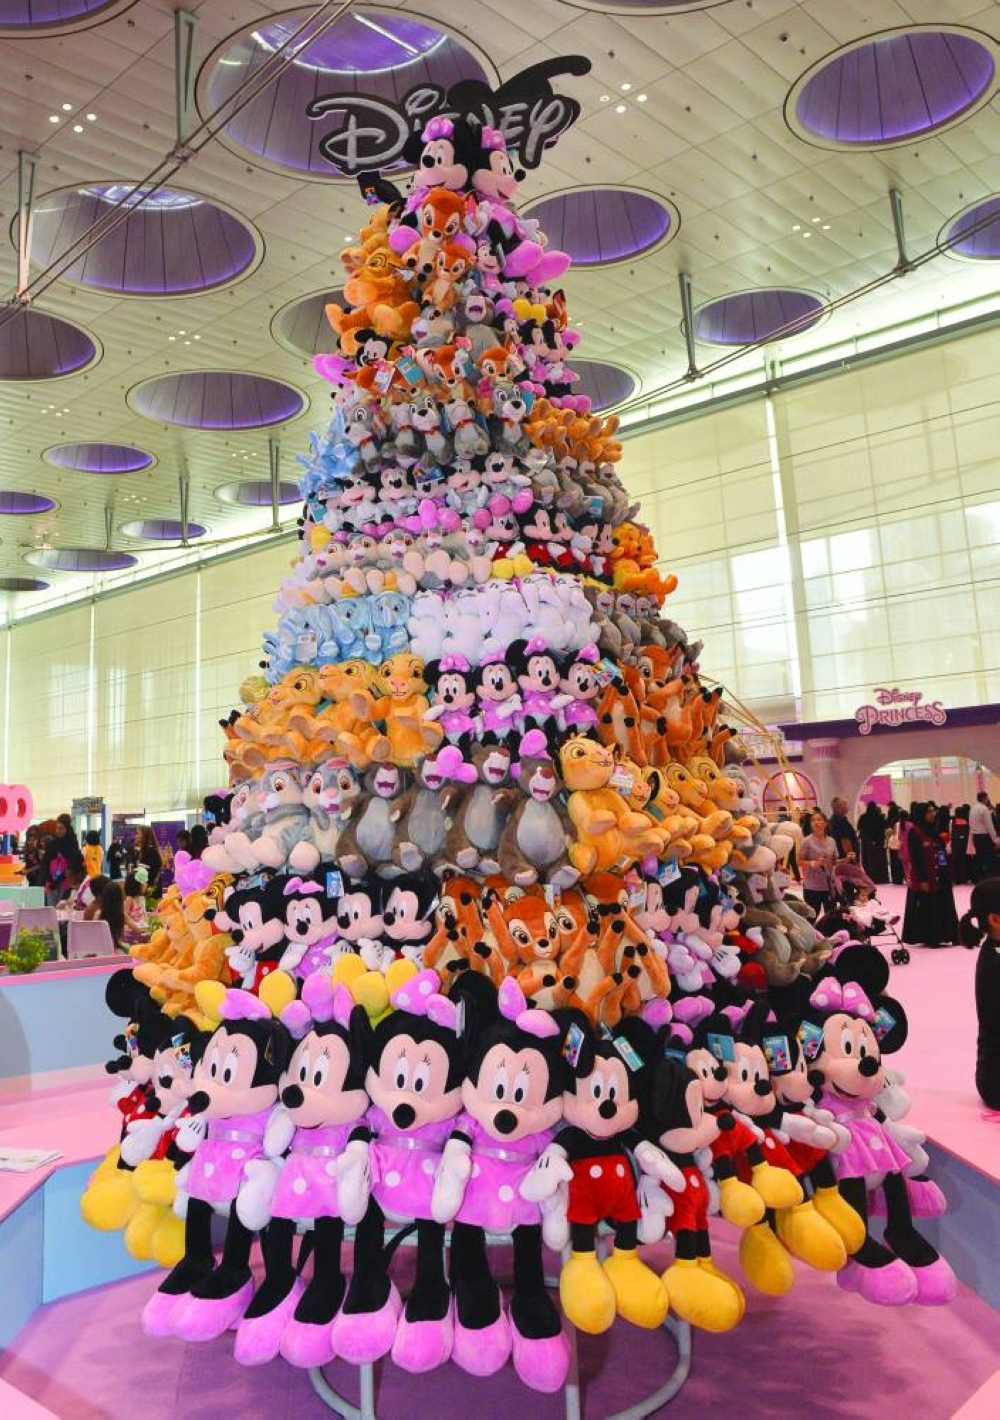 Qatar Toy Festival attracts over 2,000 visitors on first day